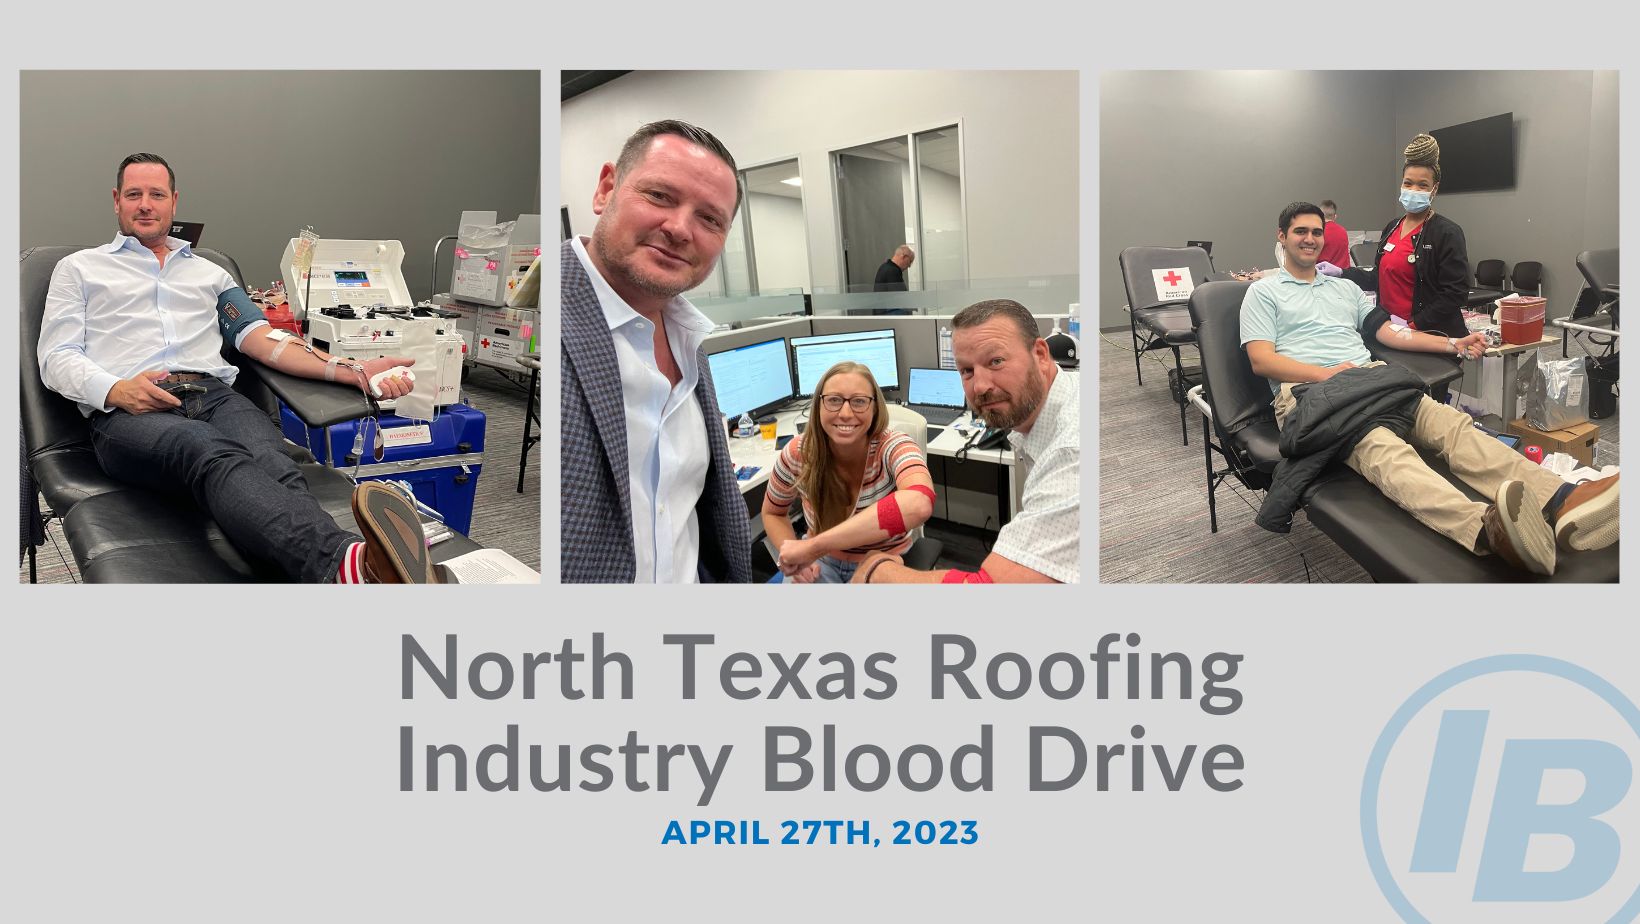 North Texas Roofing Industry Blood Drive Event